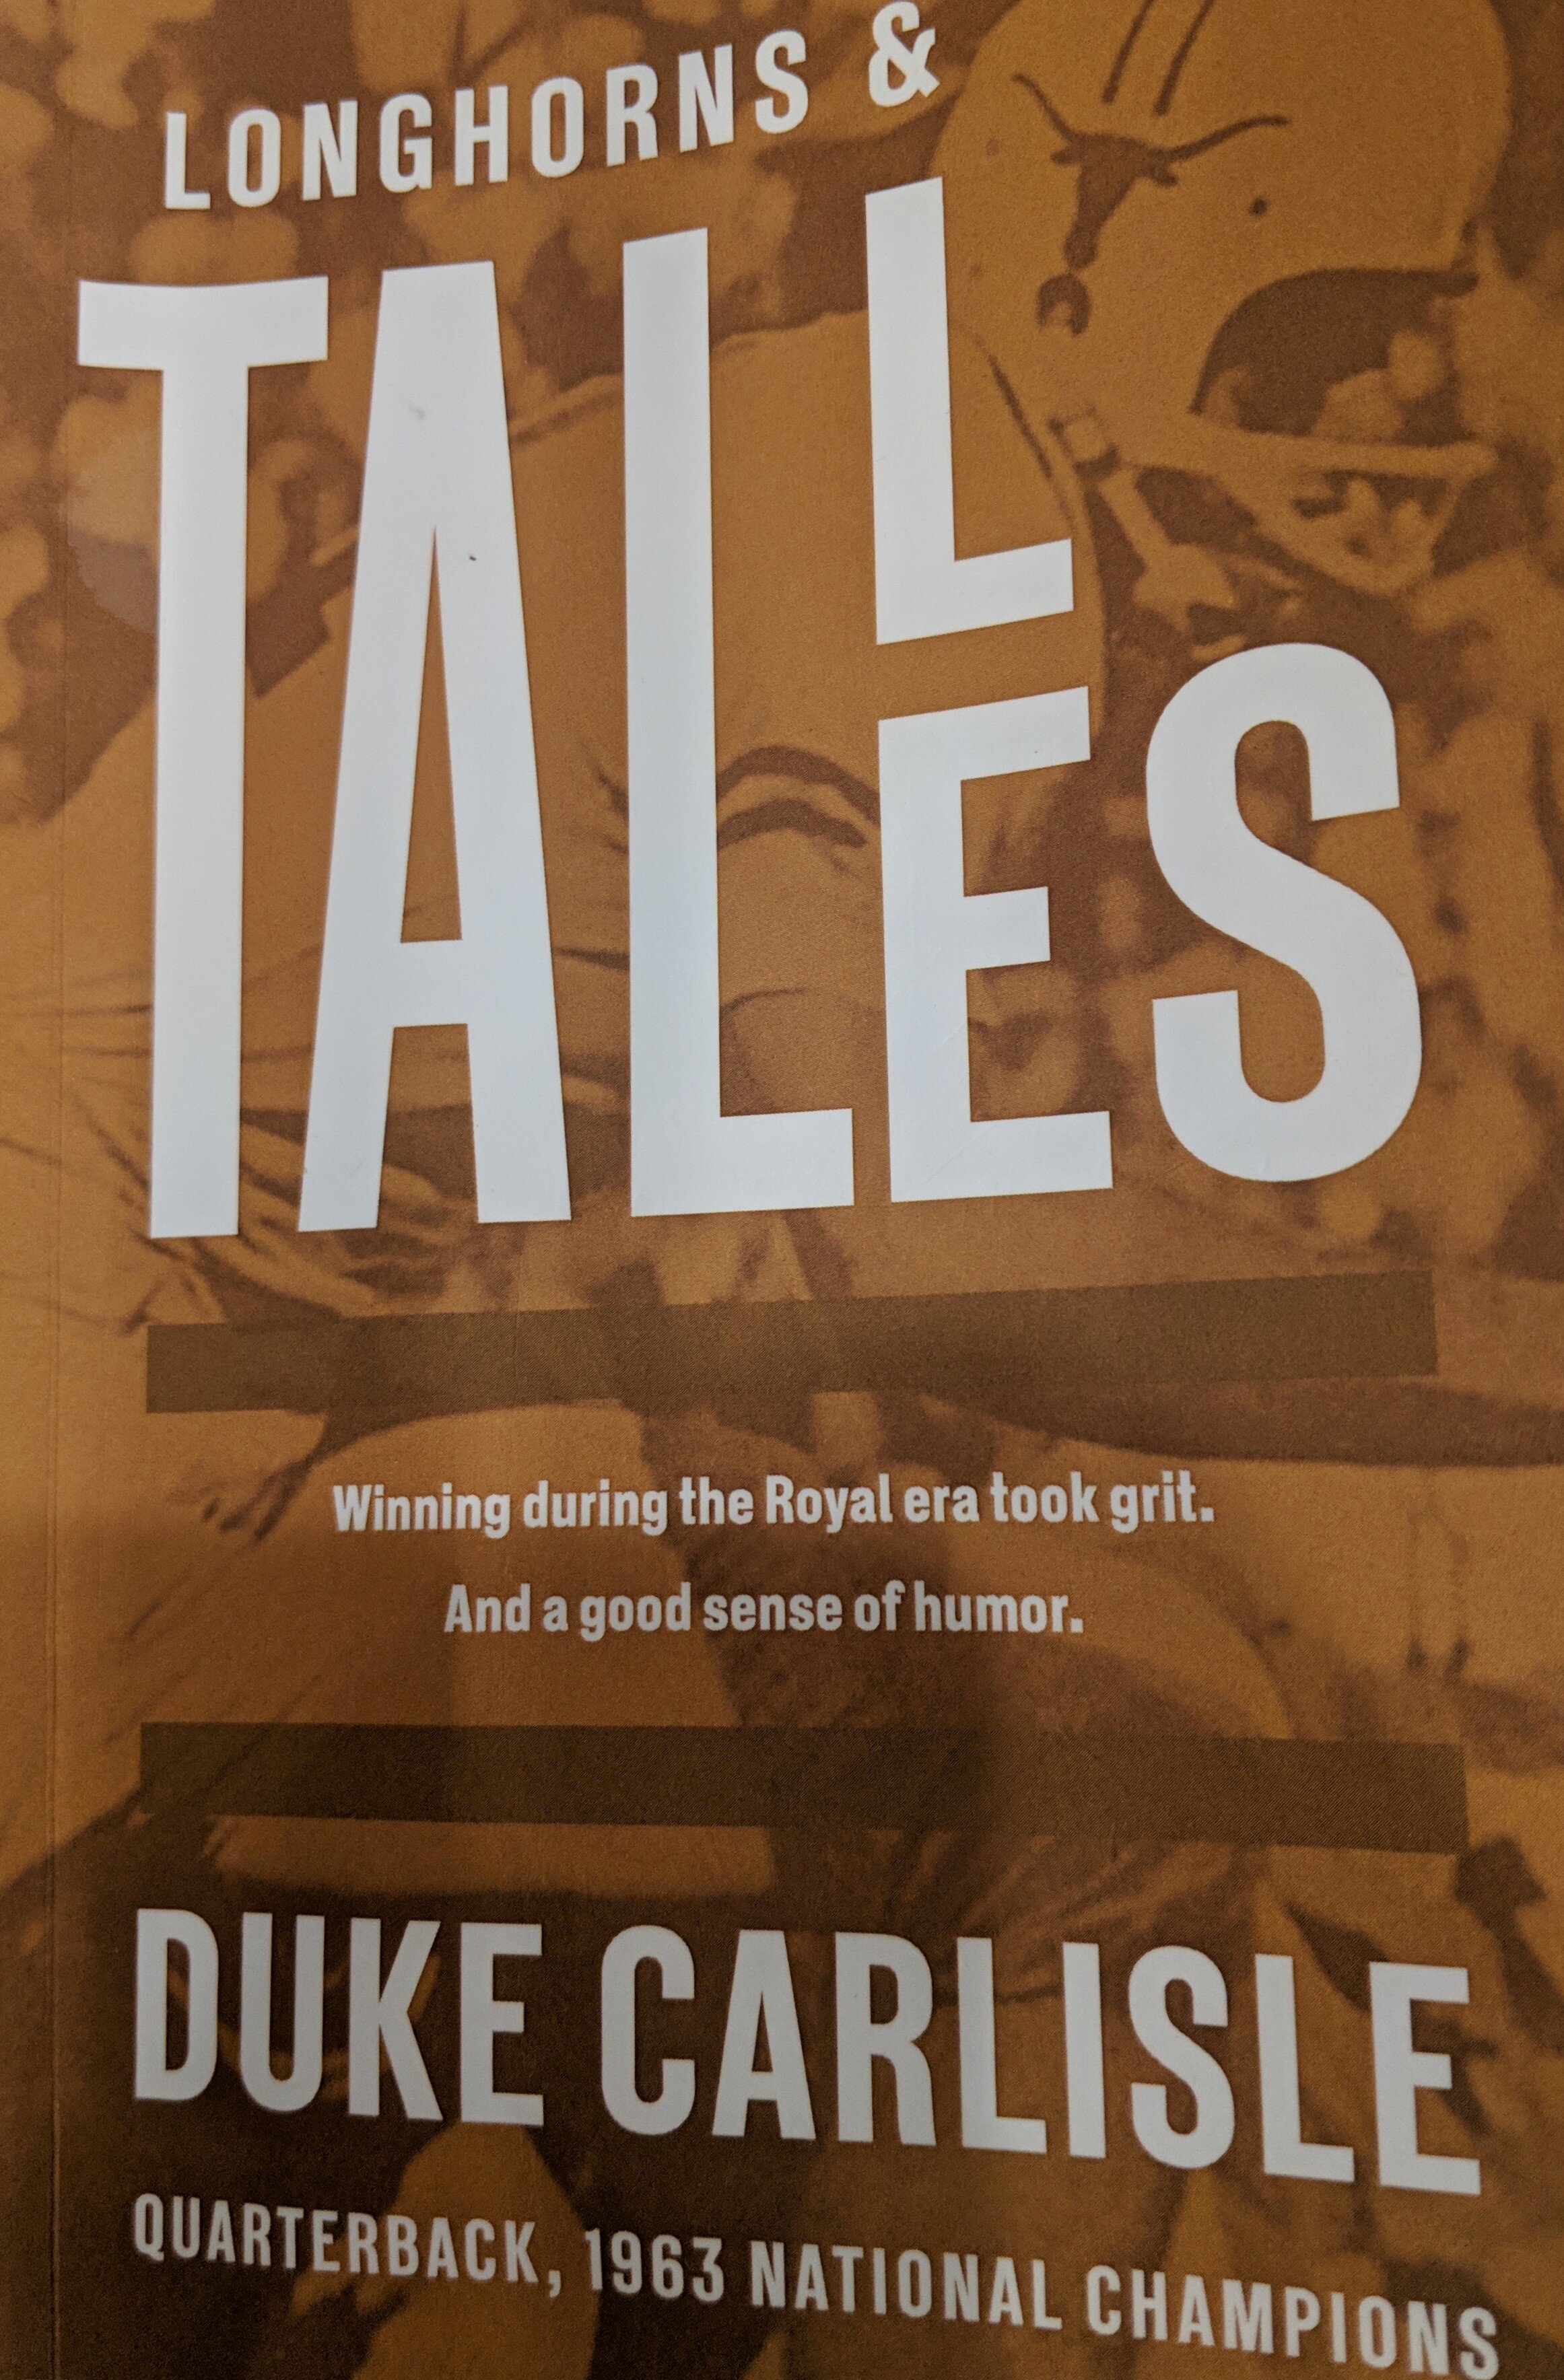 Duke shares humor in his book